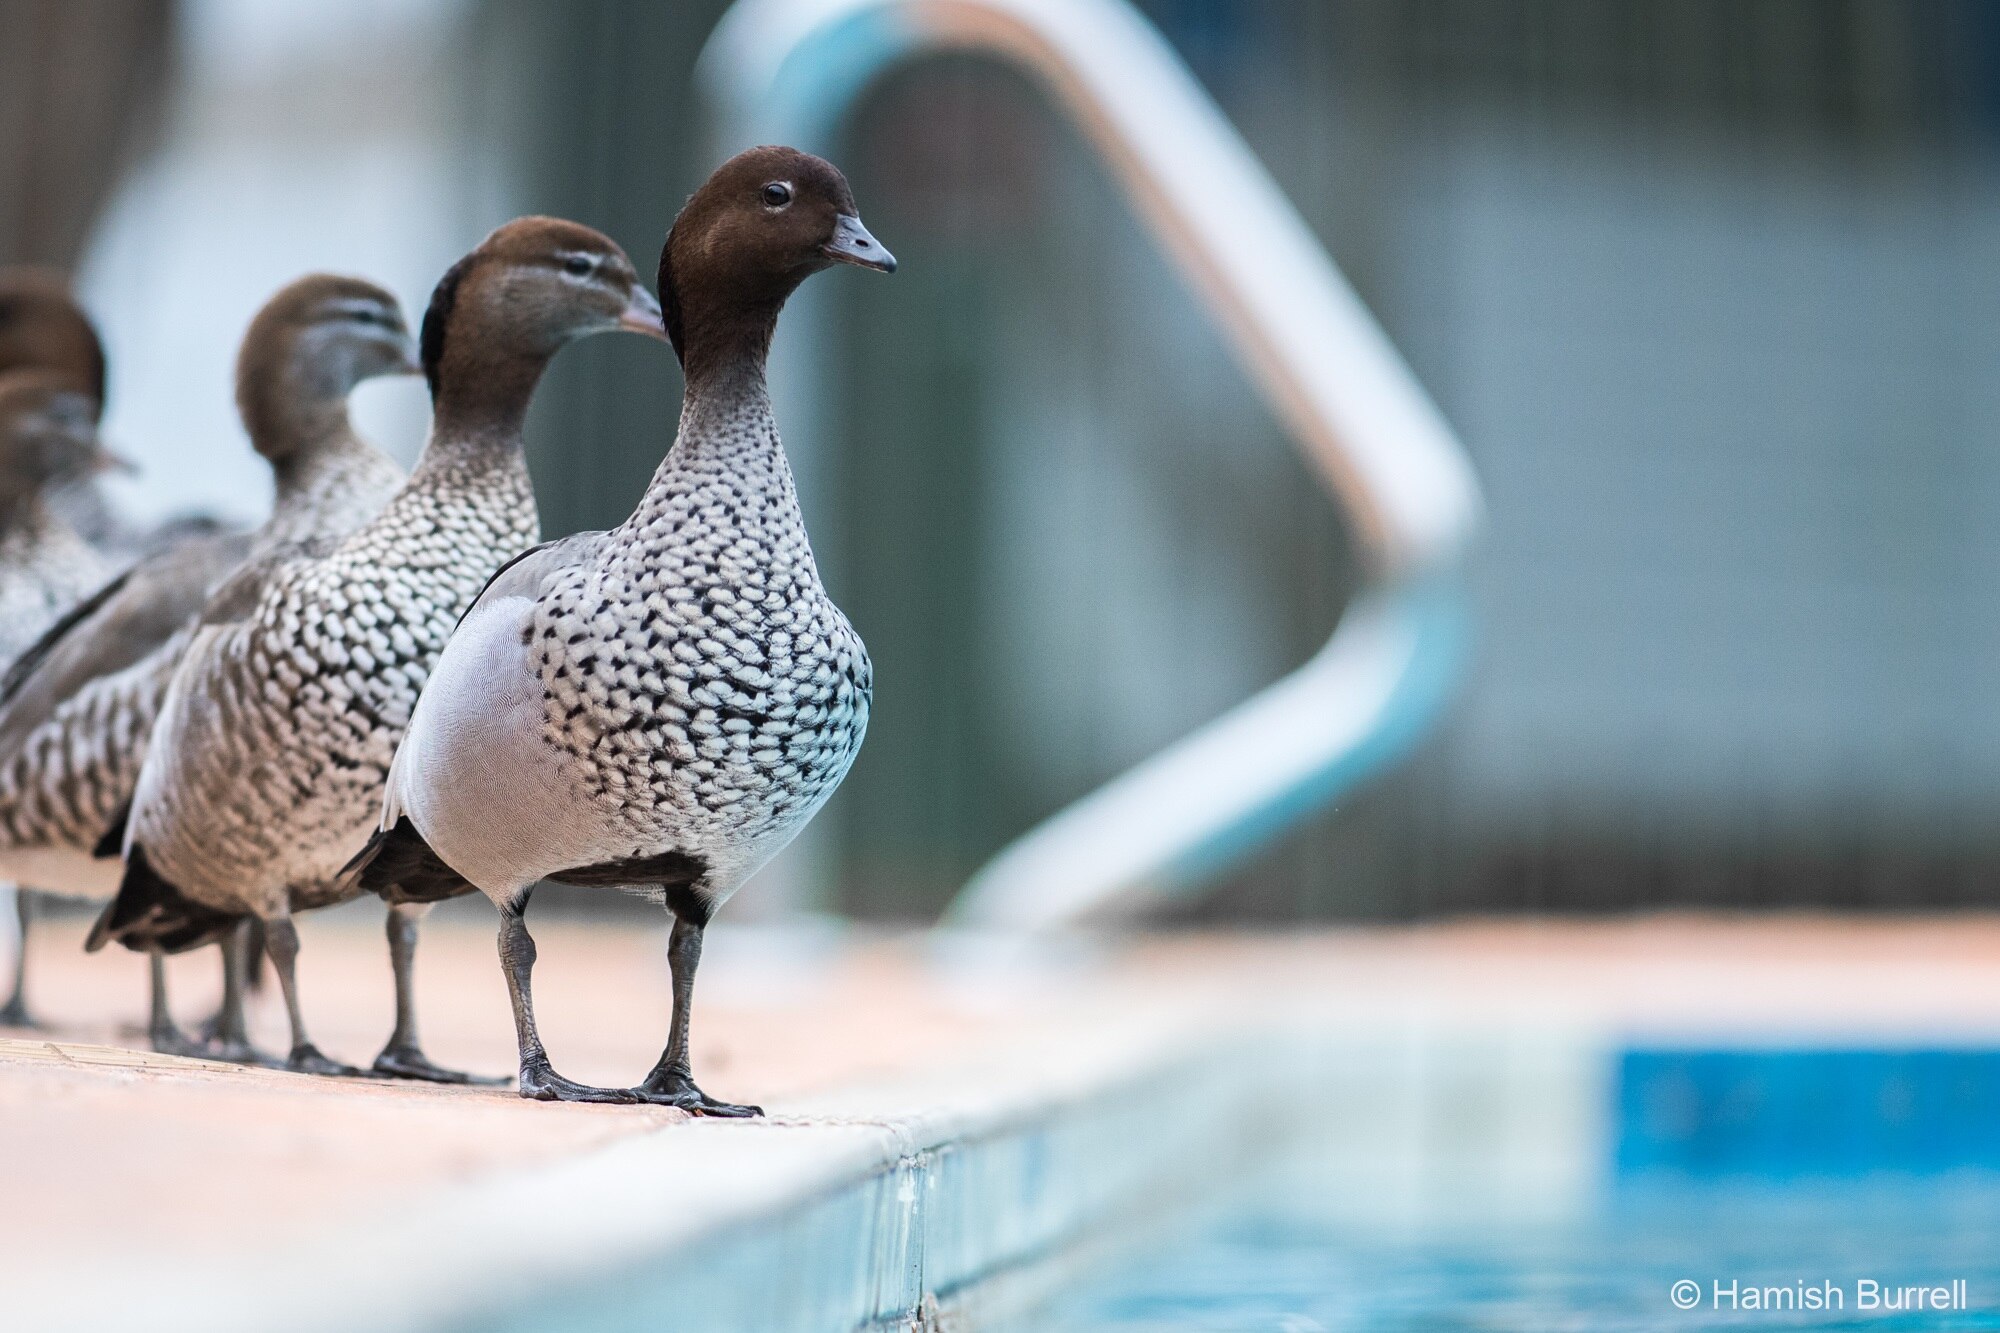 Five ducks lined up to jump into a swimming pool